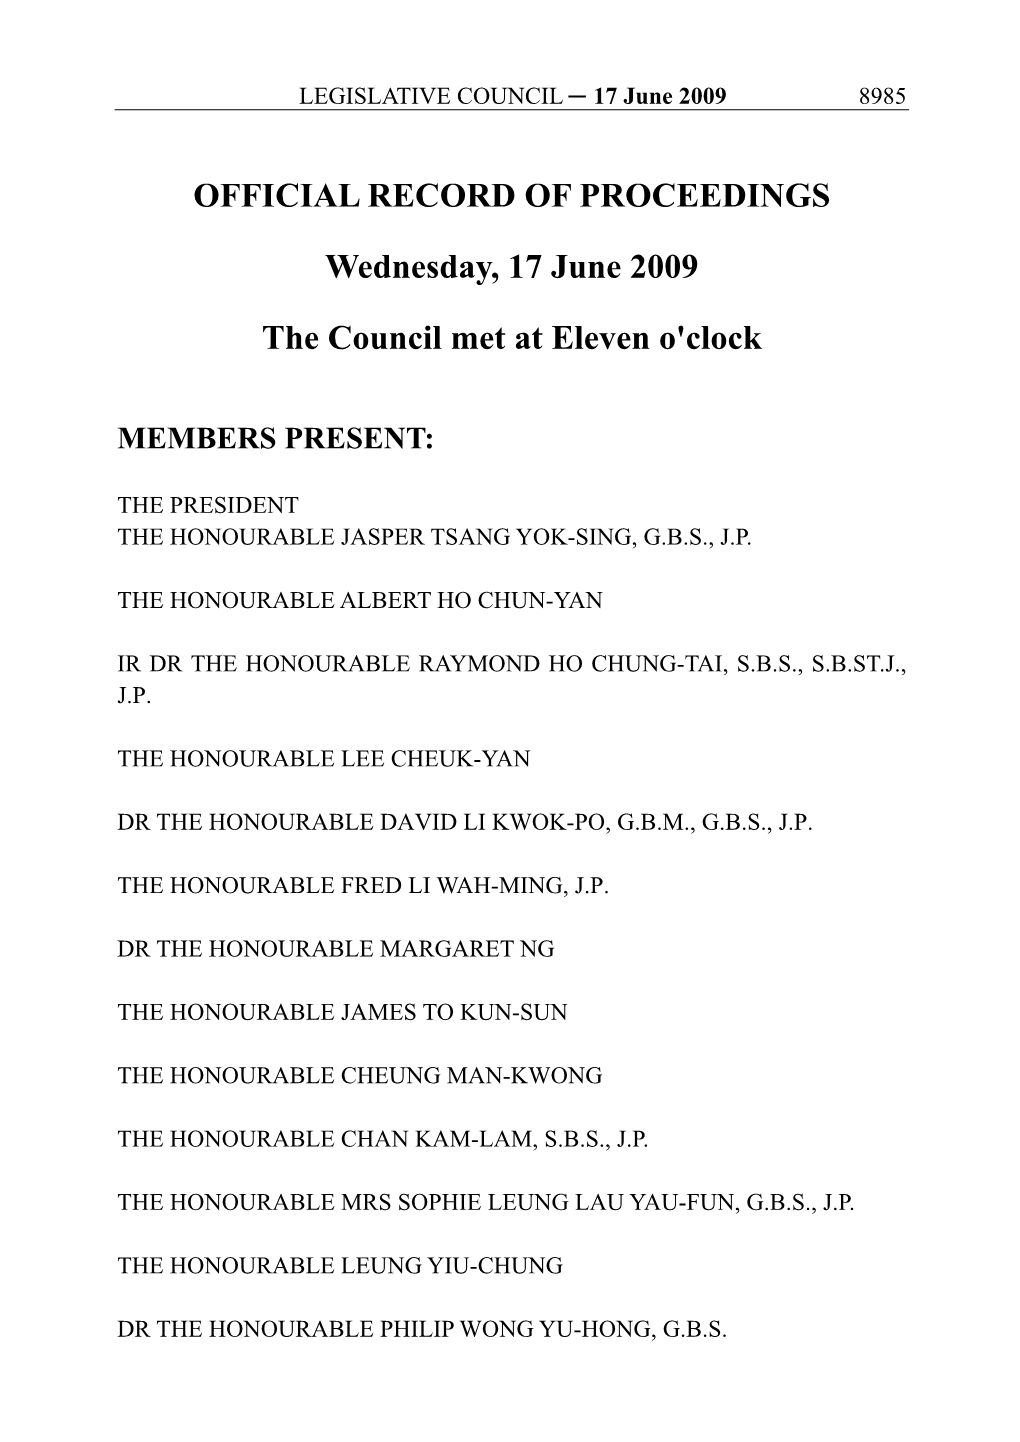 OFFICIAL RECORD of PROCEEDINGS Wednesday, 17 June 2009 the Council Met at Eleven O'clock